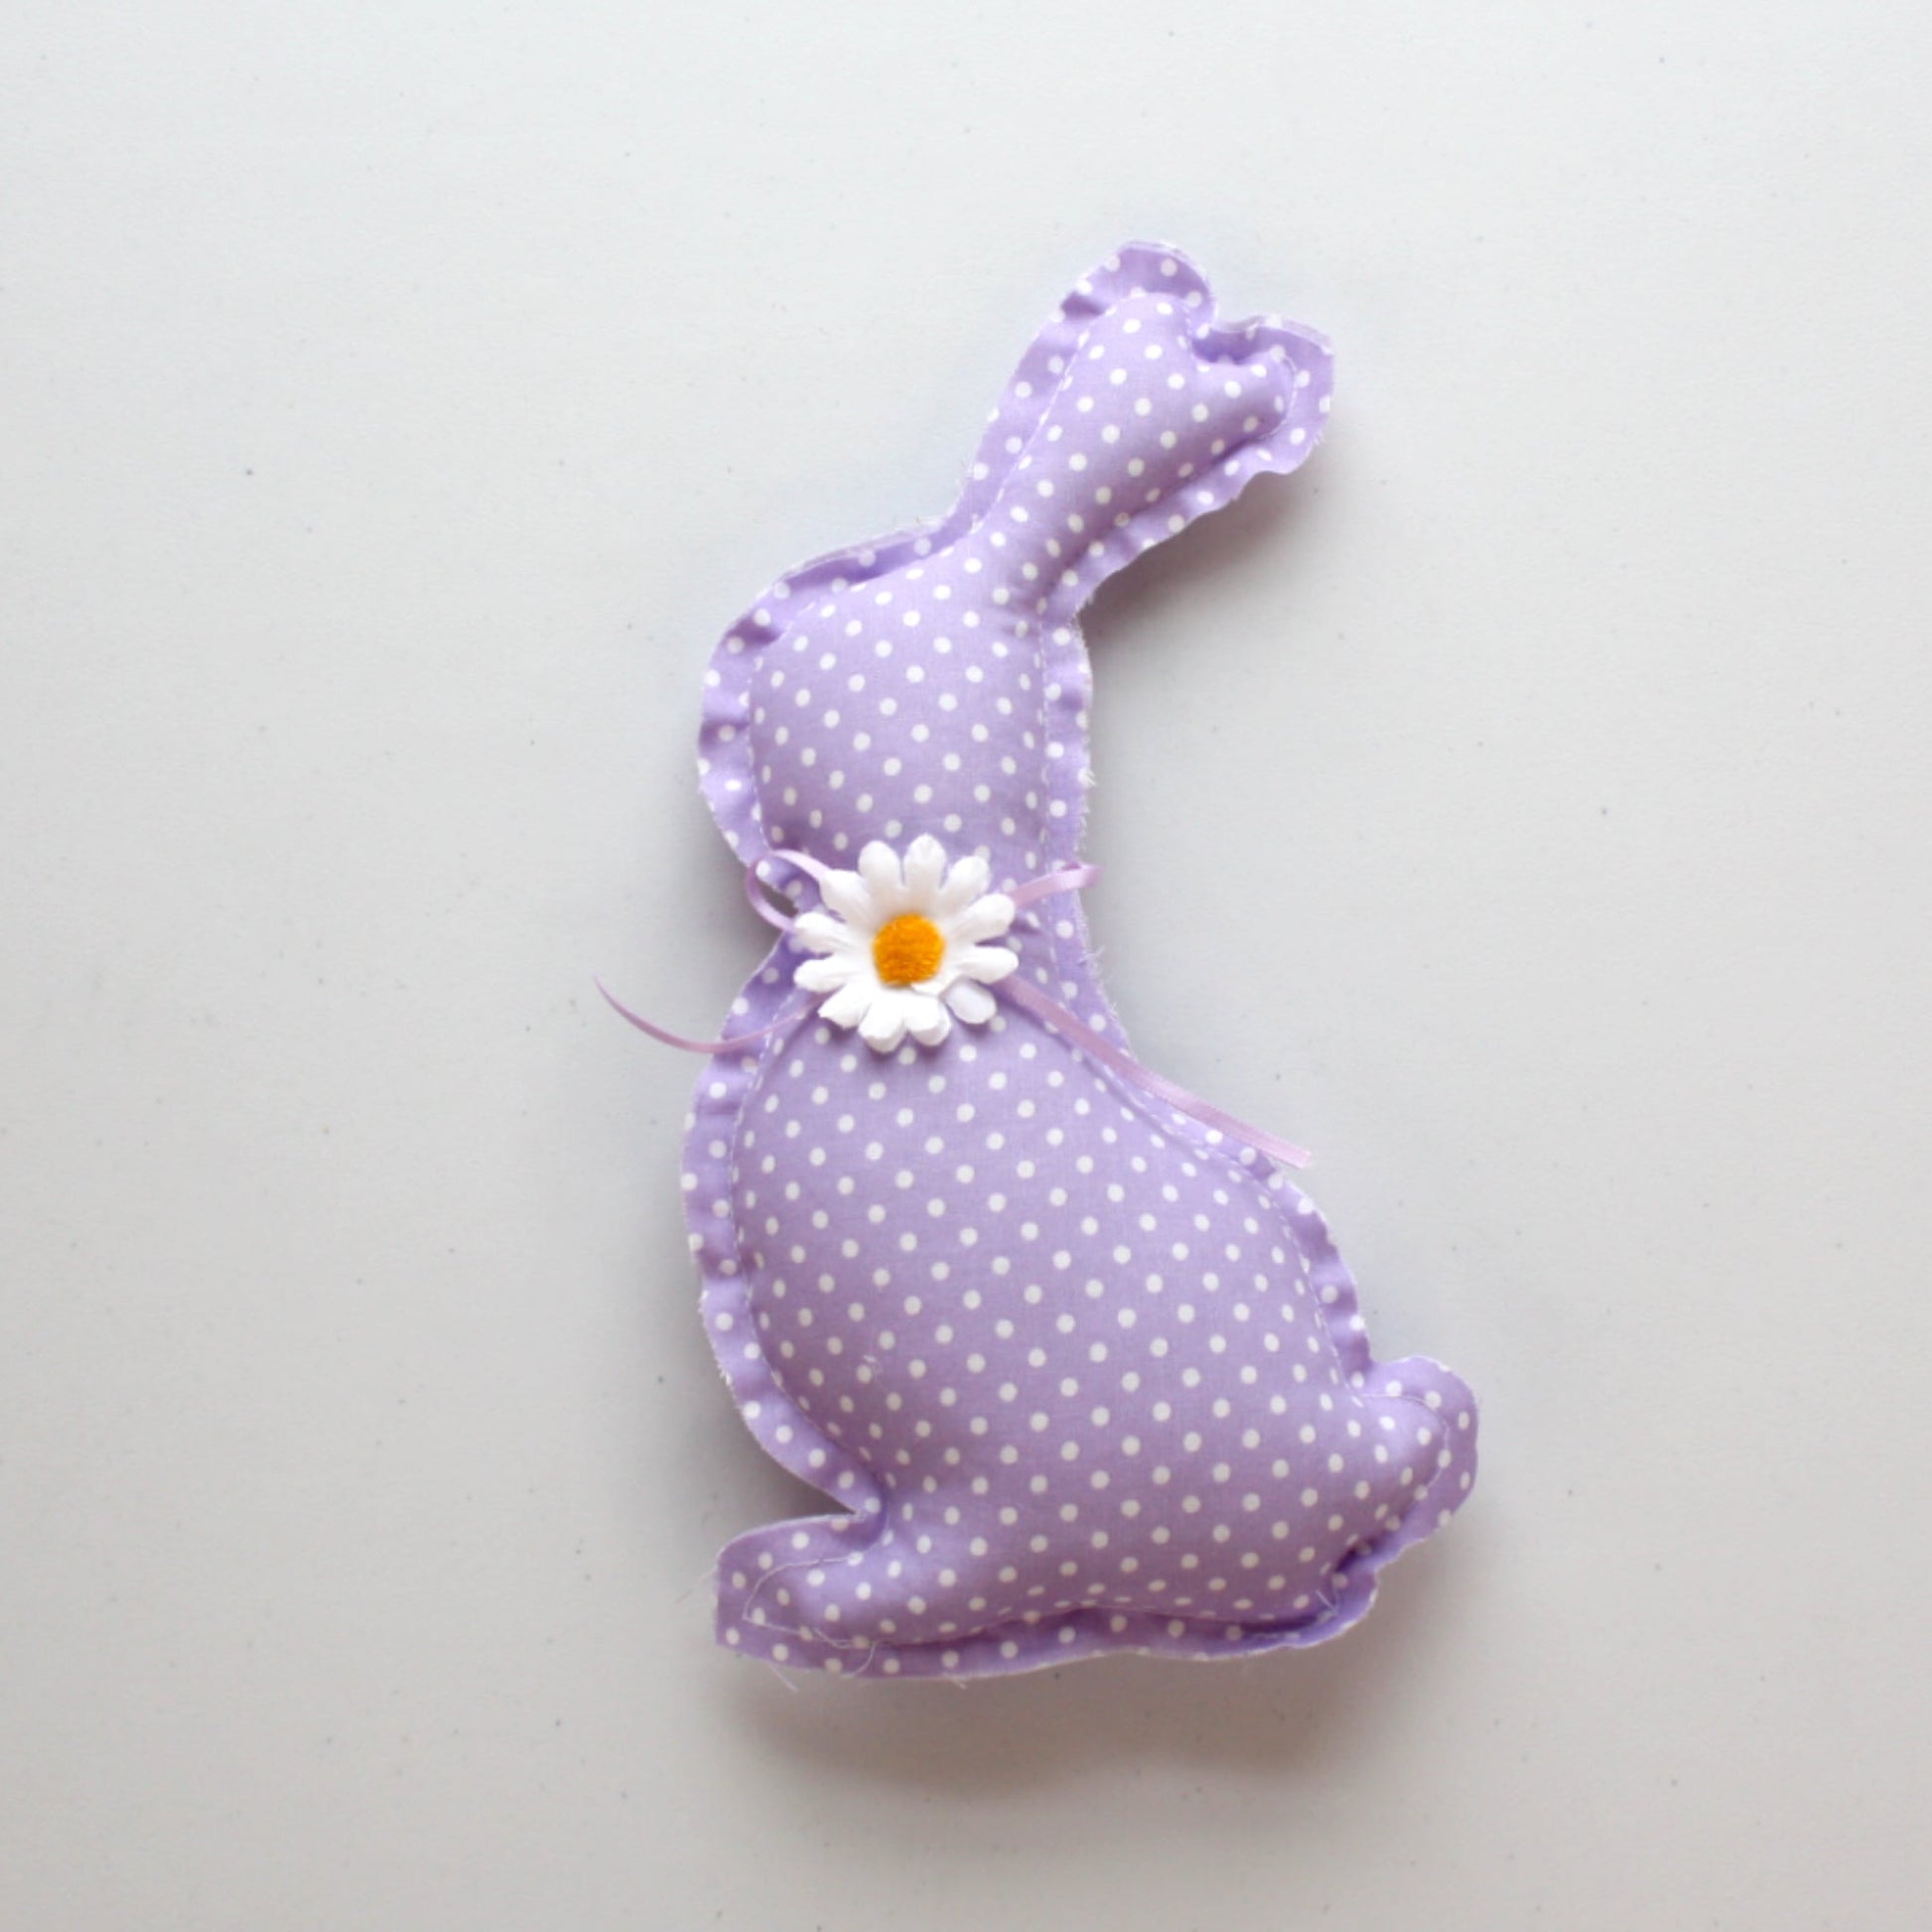 Cotton Spring Bunnies - Made in the USA